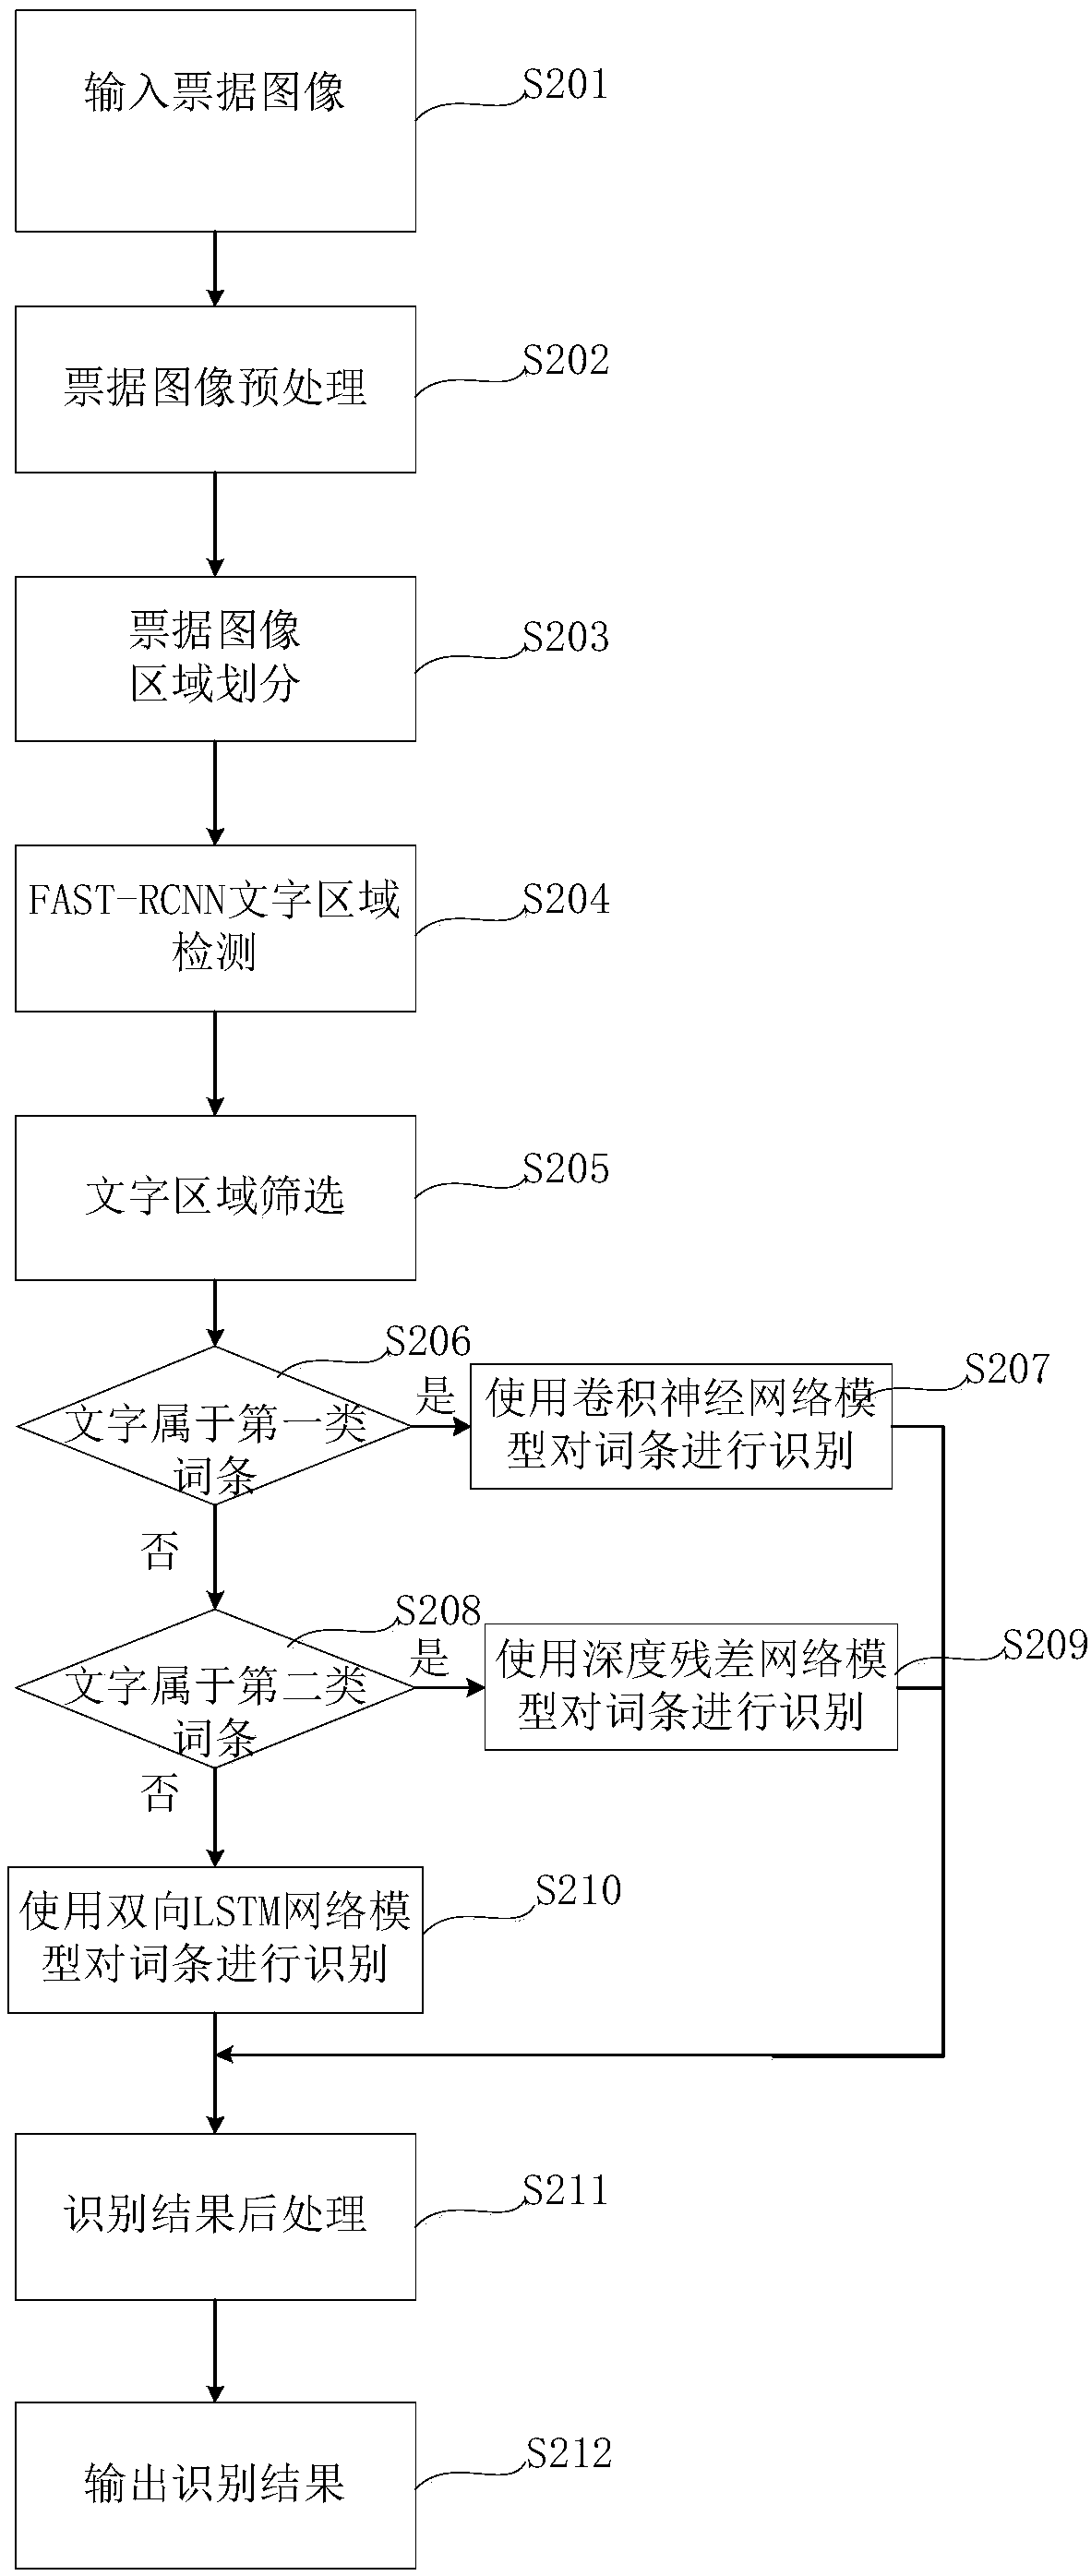 Image-based character recognition method